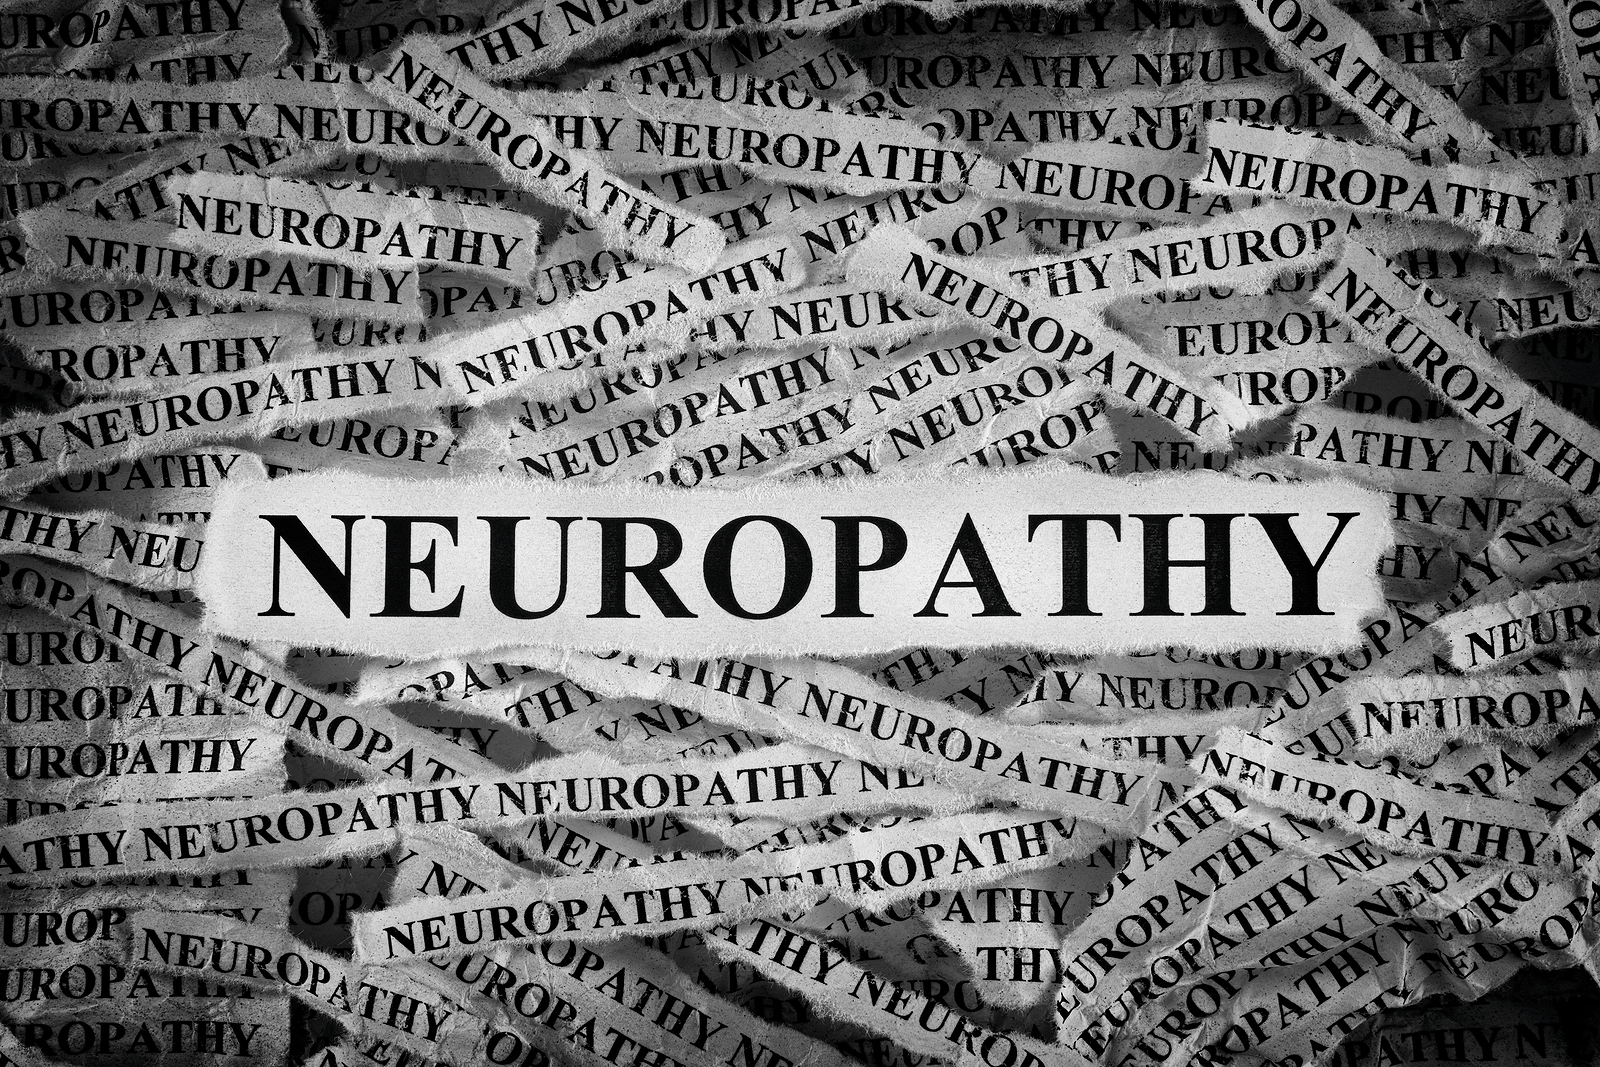 Five Ways Your Senior May Be Able to Manage Neuropathy Pain at Home